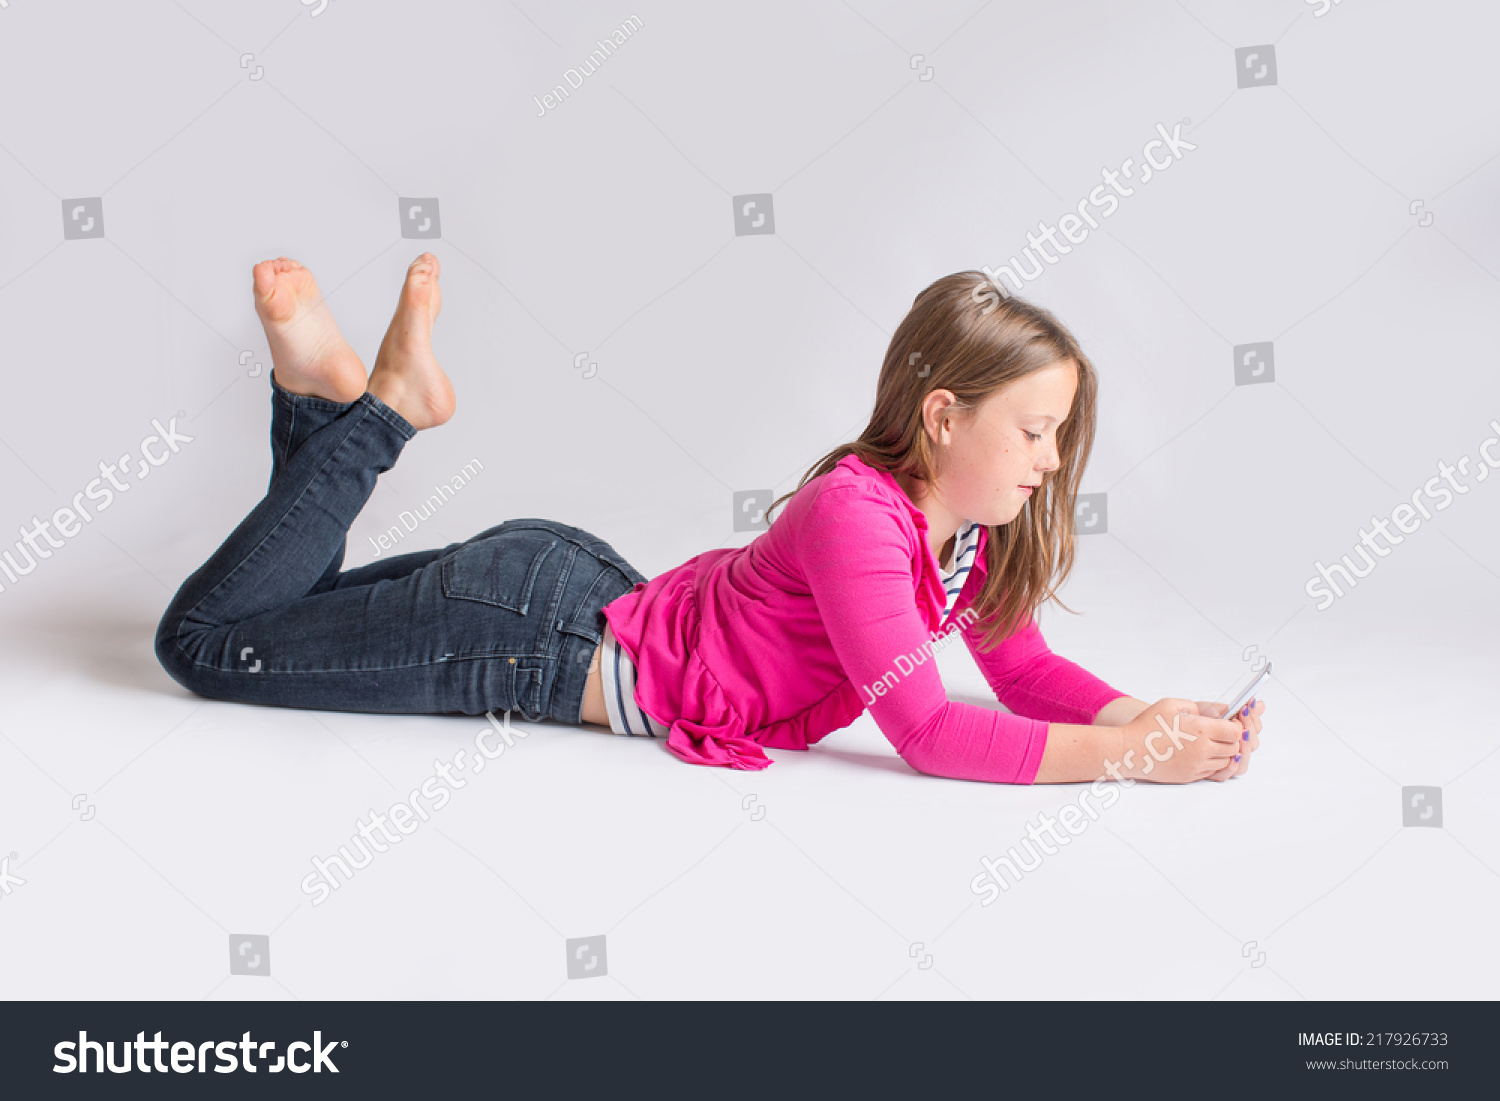 Photo De Stock Young Girl Lying On Stomach While 217926733 Shutterstock 0550